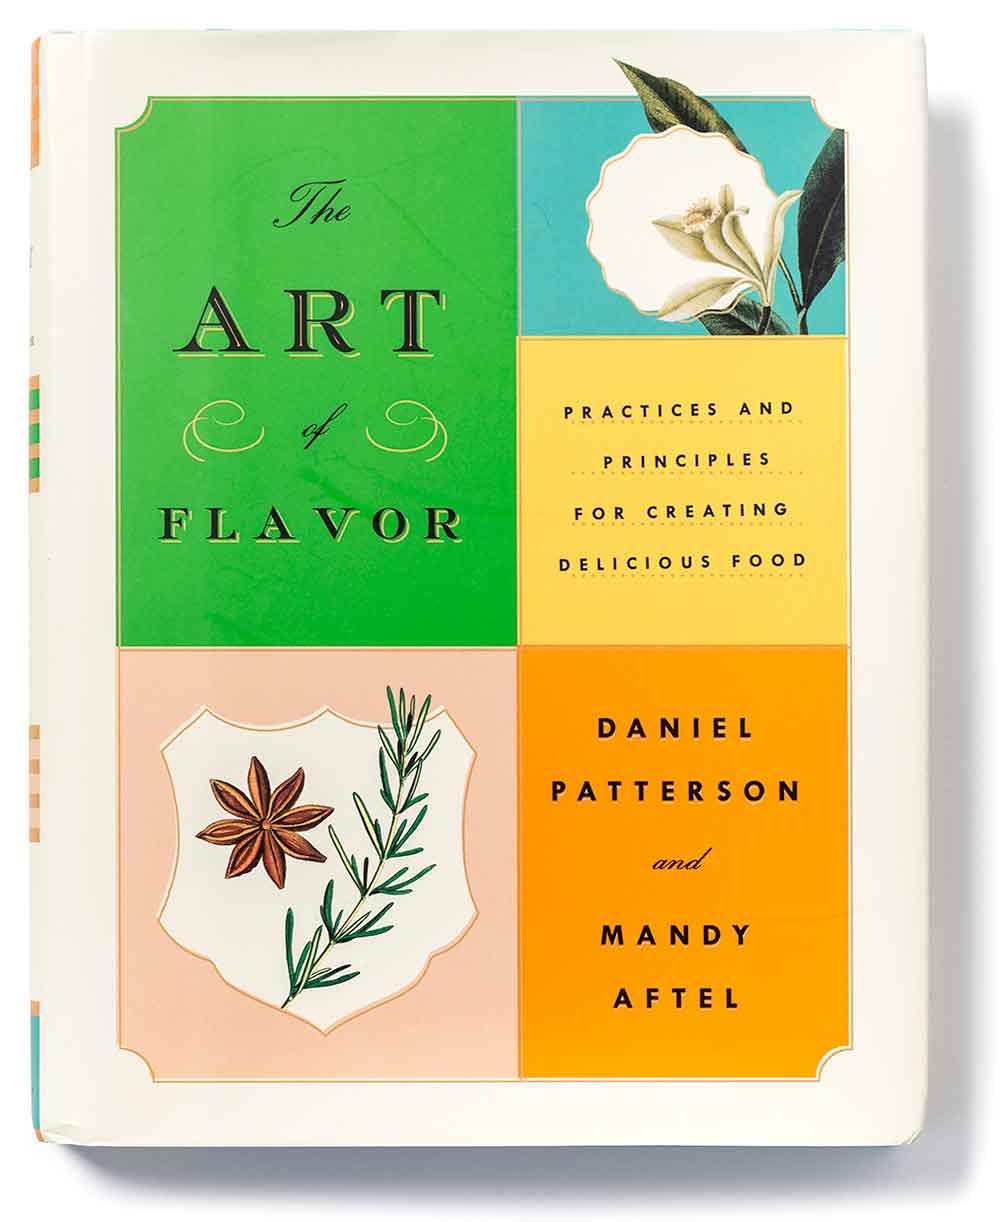 The Art of Flavor: Practices and Principles for Creating Delicious Food – Daniel Patterson, Mandy Aftel